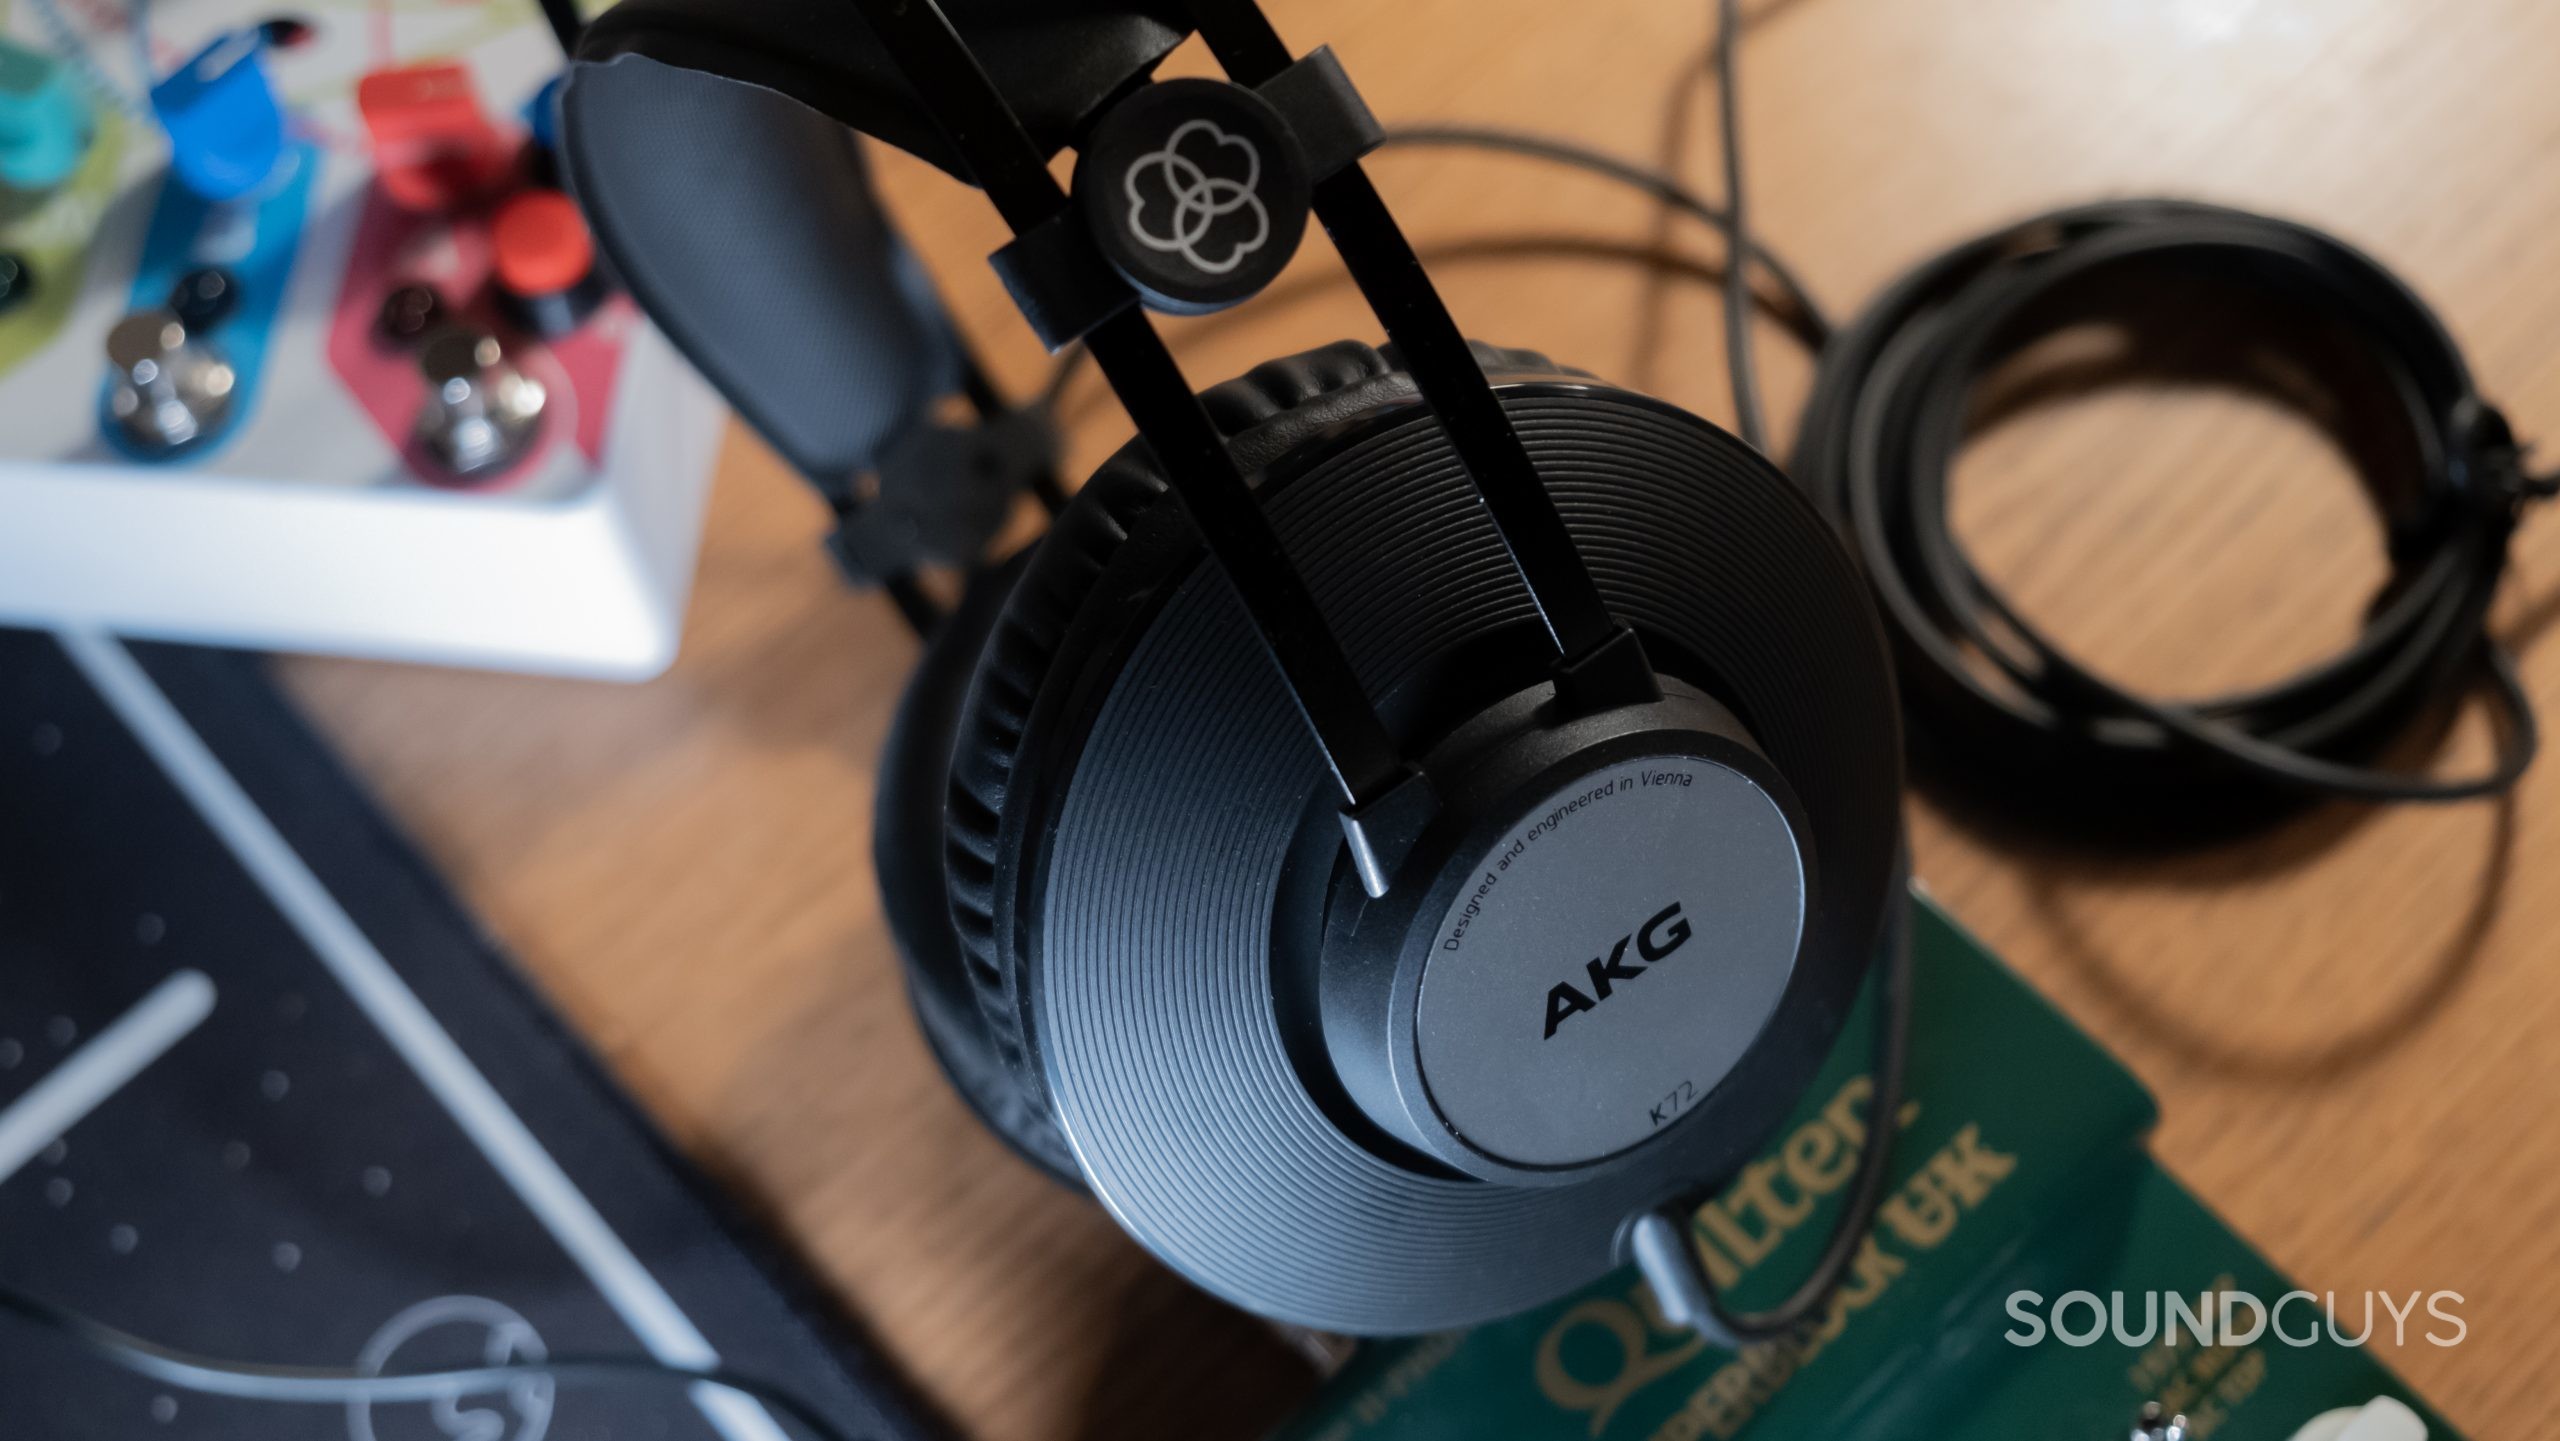 A close up of the ear cup of the AKG K72 with music gear in the background.